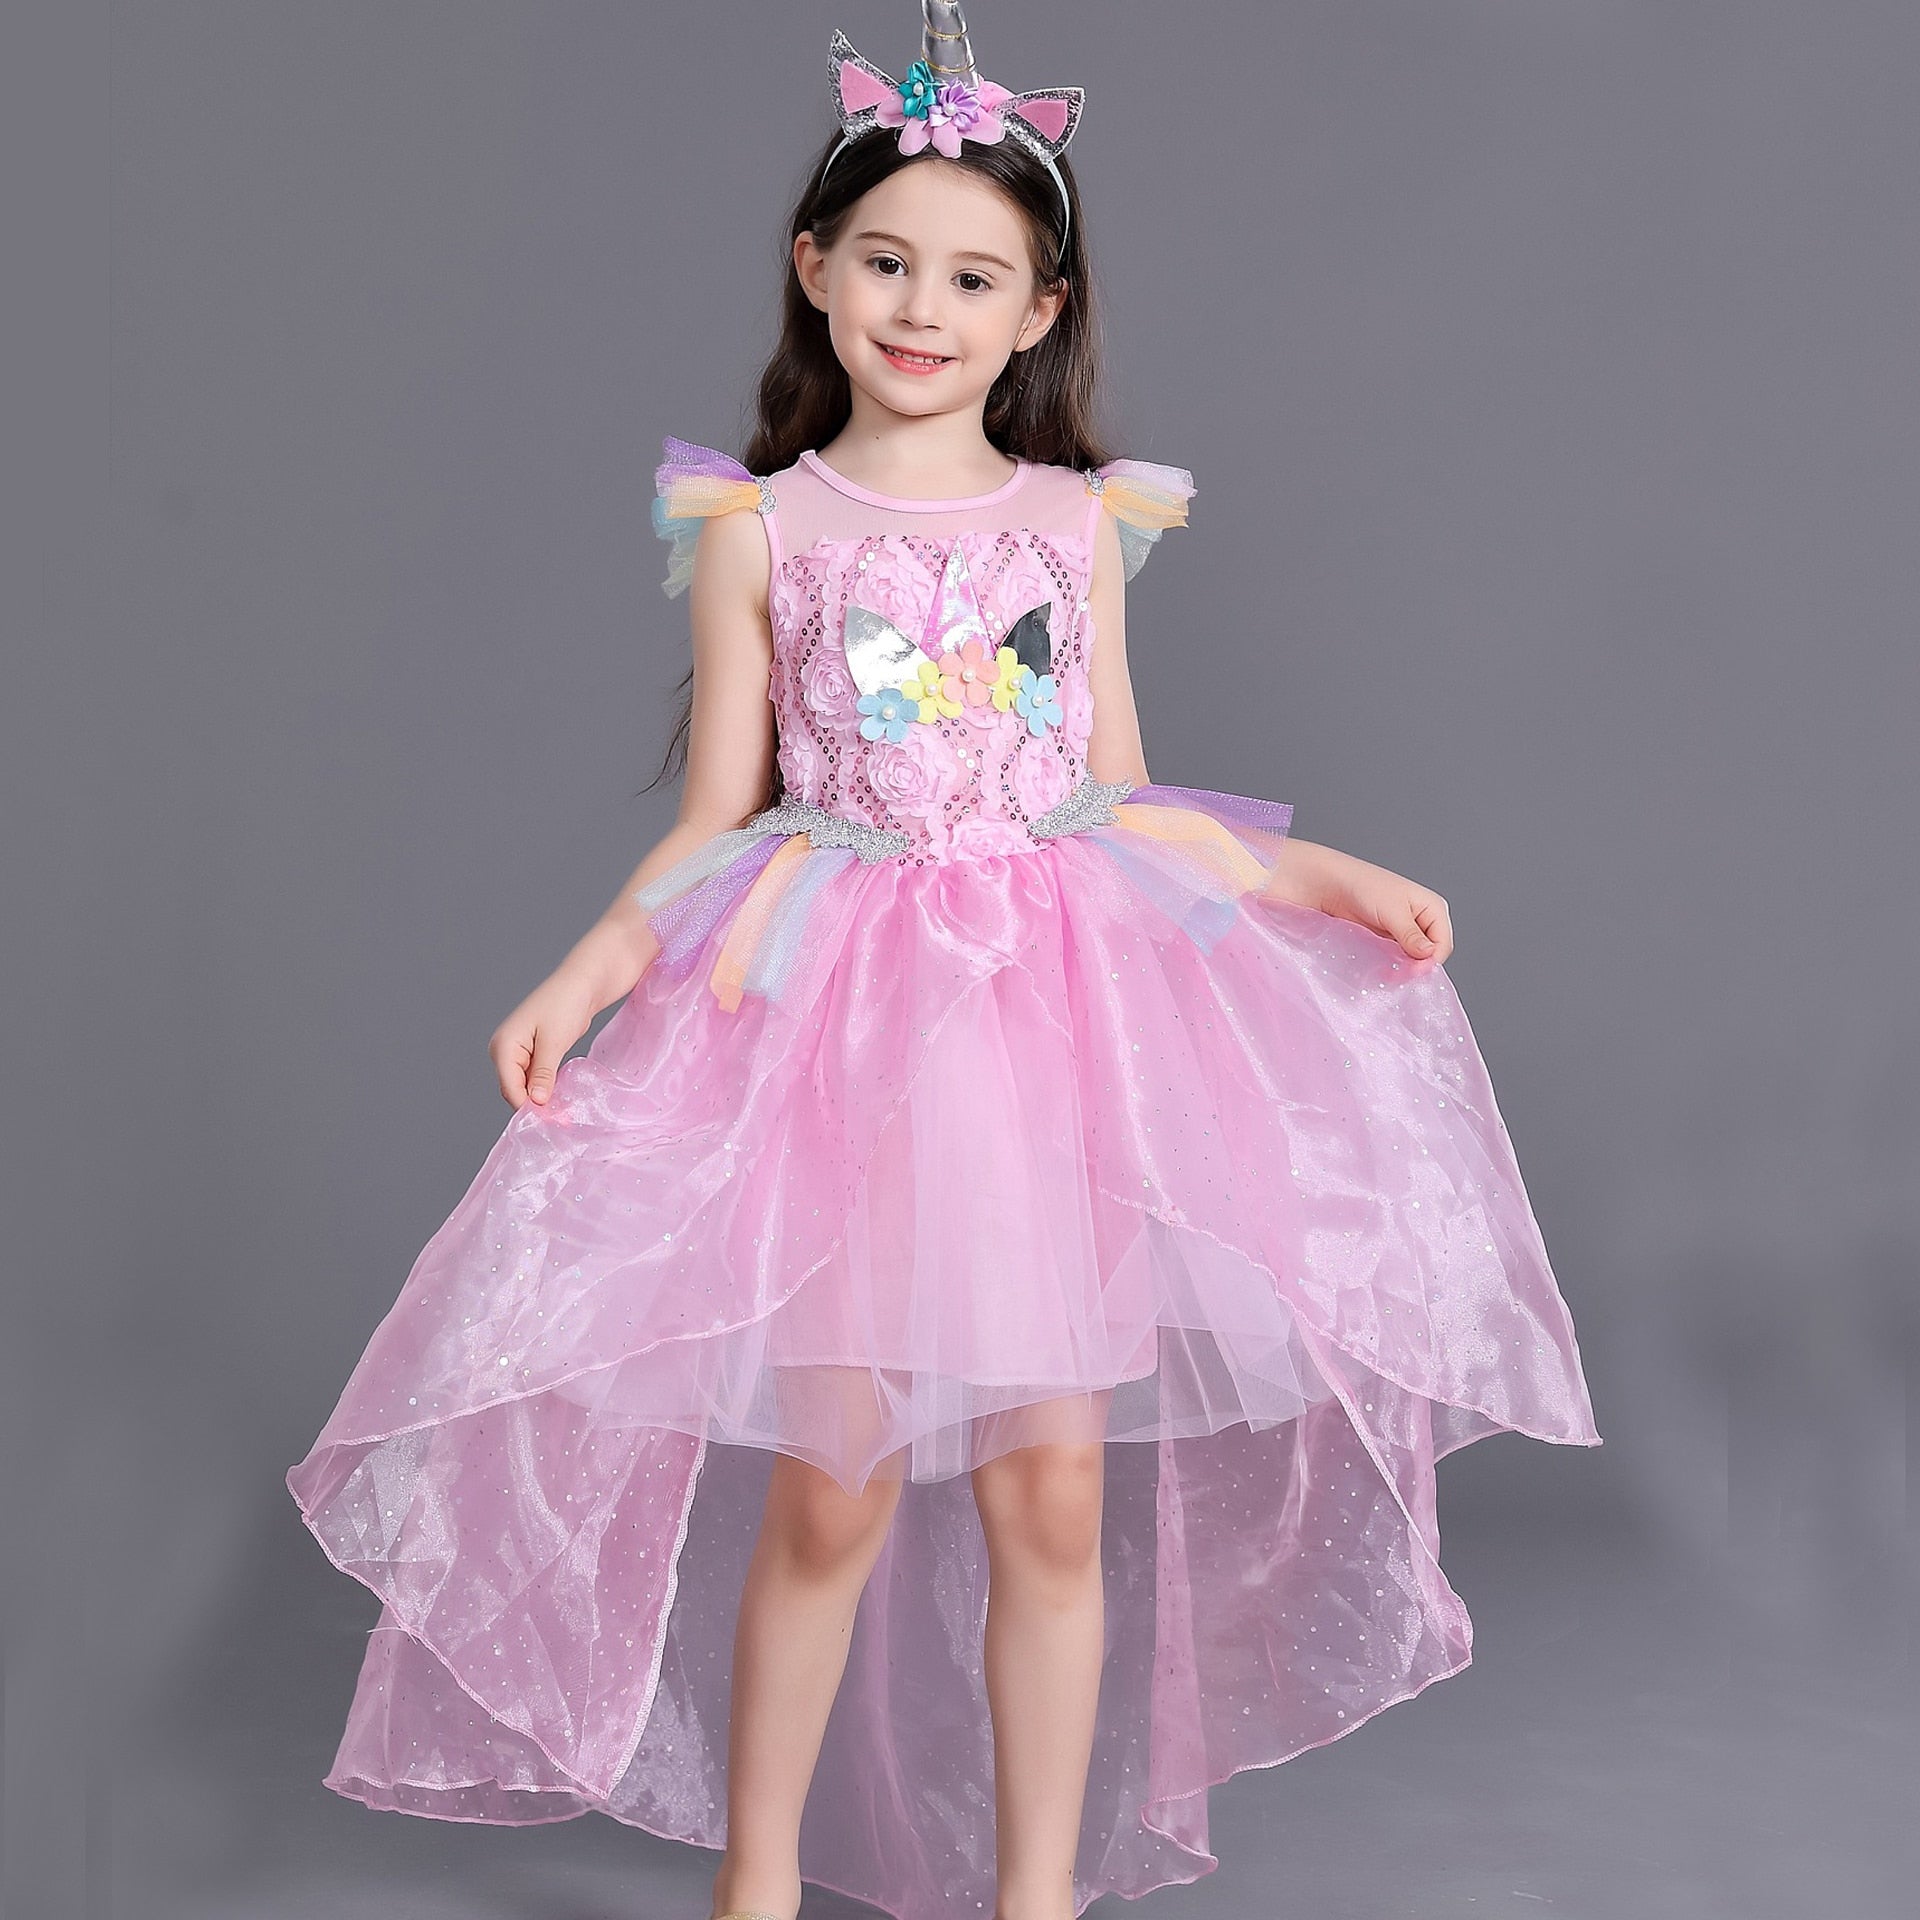 5 Year Girl Party Dresses - Best and Beautiful Birthday Gown